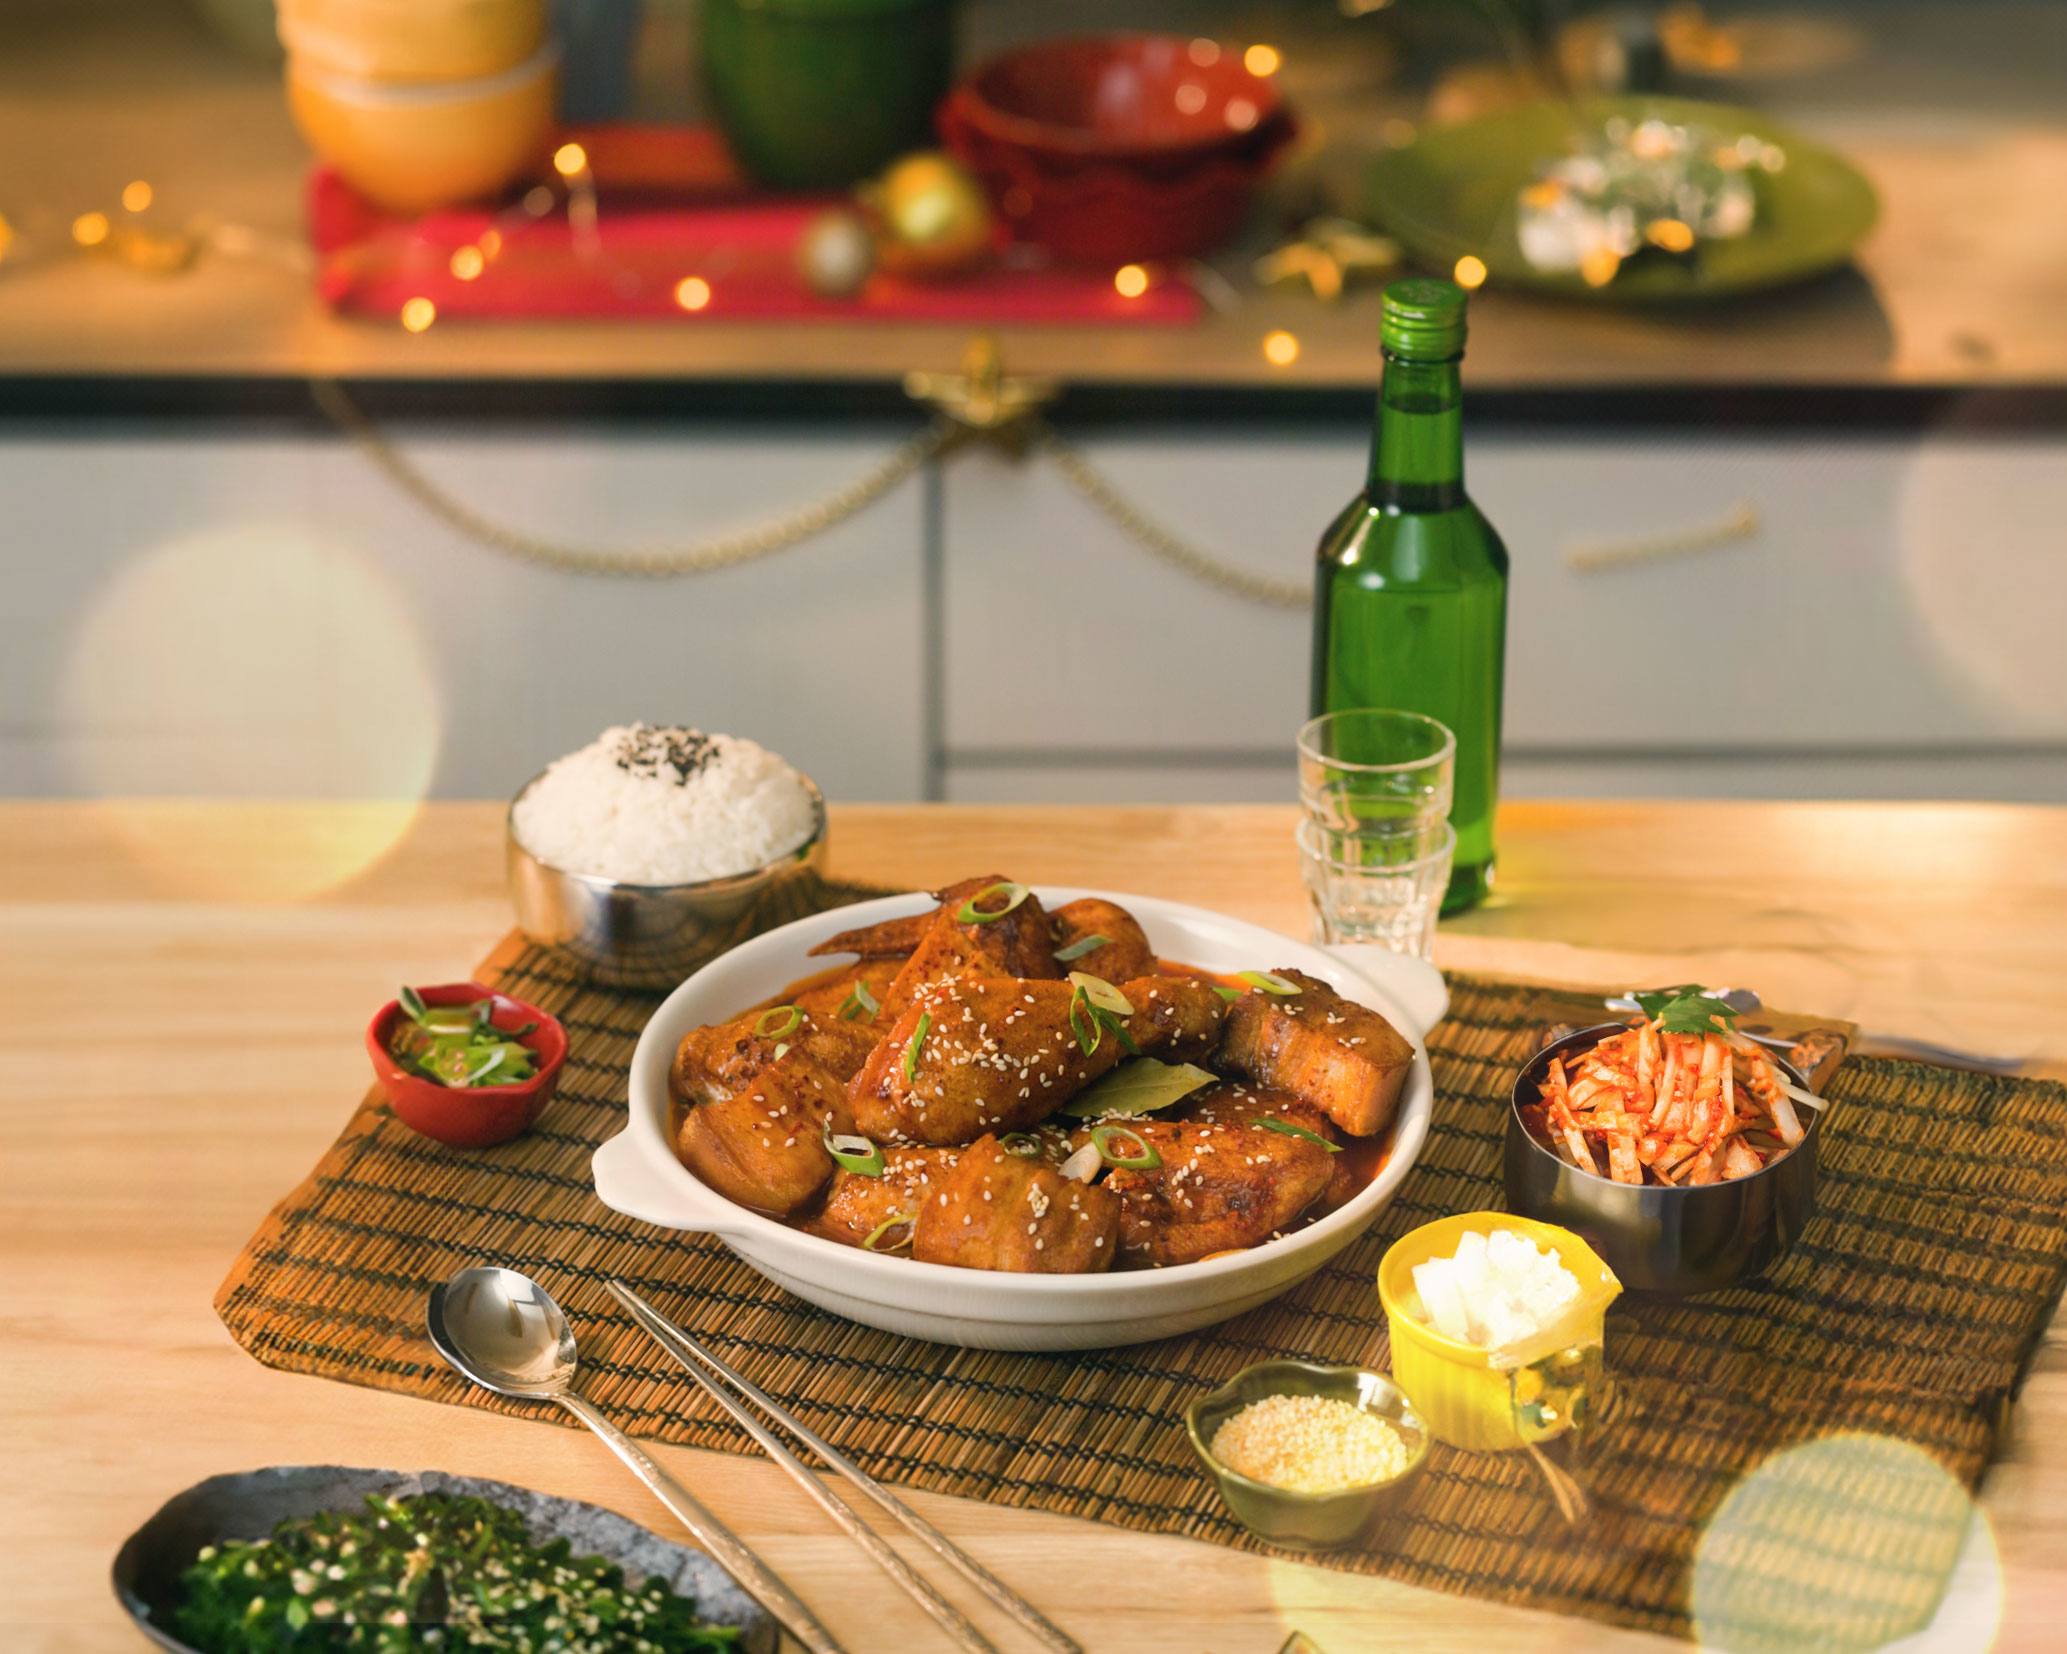 Add a K-Twist to Your Christmas with This Korean-Style Adobo